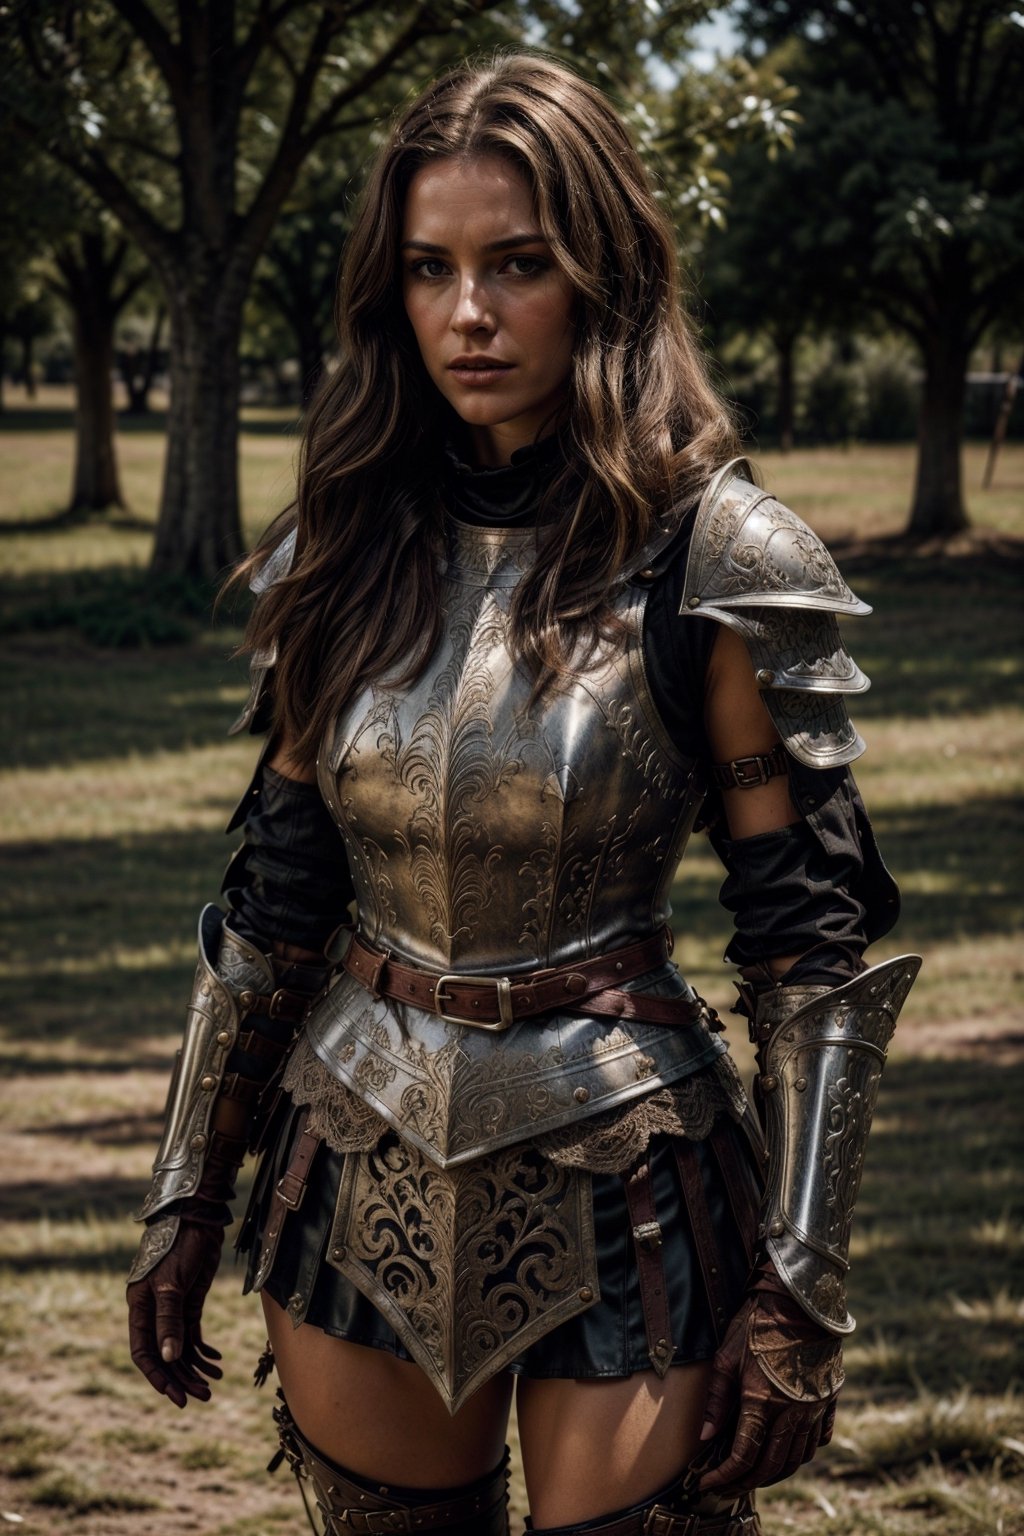 beautiful woman, good posture, solo, toned
dark brown shoulder length wavy messy hair, thicc, fit
action pose
strong stance
thighs exposed, 

light armor
war
warrior
sexy
adventurous, 
 fierce, motivated 
feminine

standing in a field in the 1500s
portait

looking at camera
cuban italian

serious, confident
portrait, 50mm, film grain, bokeh, closeup

wearing medival armor,medieval armor 

plate armor, leather skirt under ,medieval armor